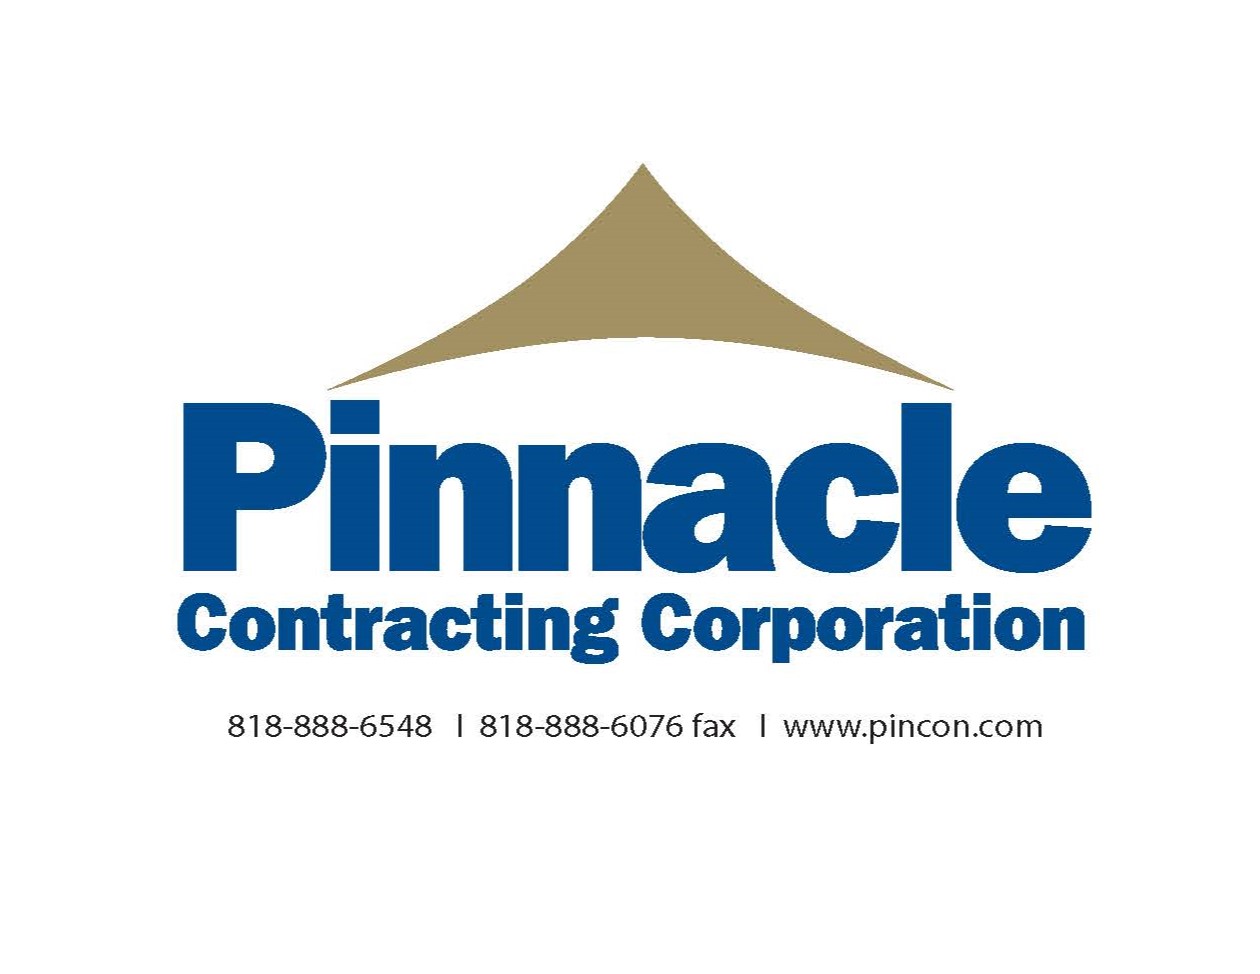 Pinnacle Contracting Corporation